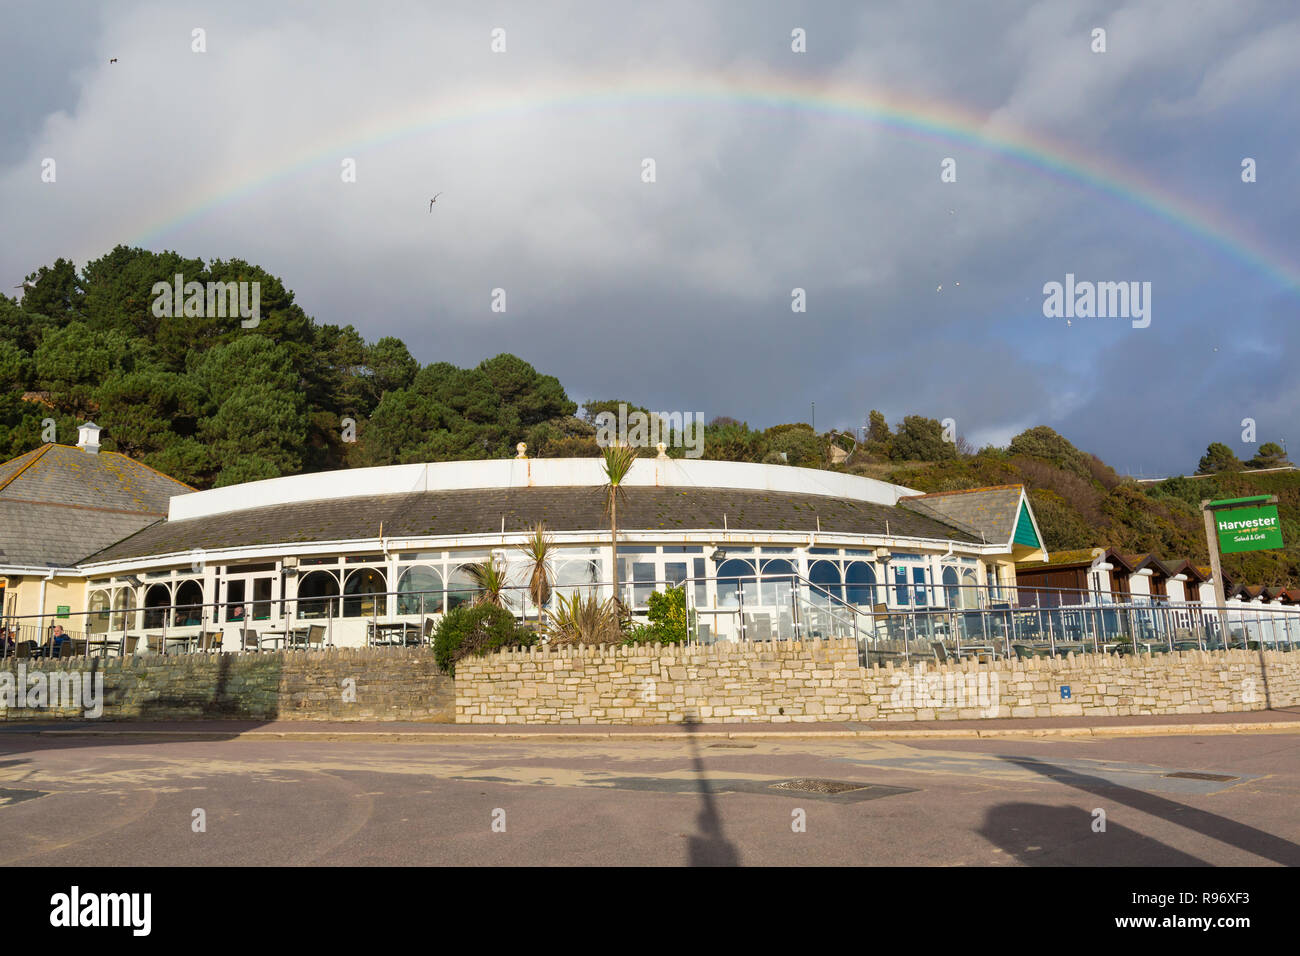 Bournemouth, Dorset, UK. 20th December 2018. Rainbow over Bournemouth on a mainly sunny day. Rainbow over the Durley Inn Harvester chain pub restaurant, exterior at West Undercliff Promenade. Credit: Carolyn Jenkins/Alamy Live News Stock Photo